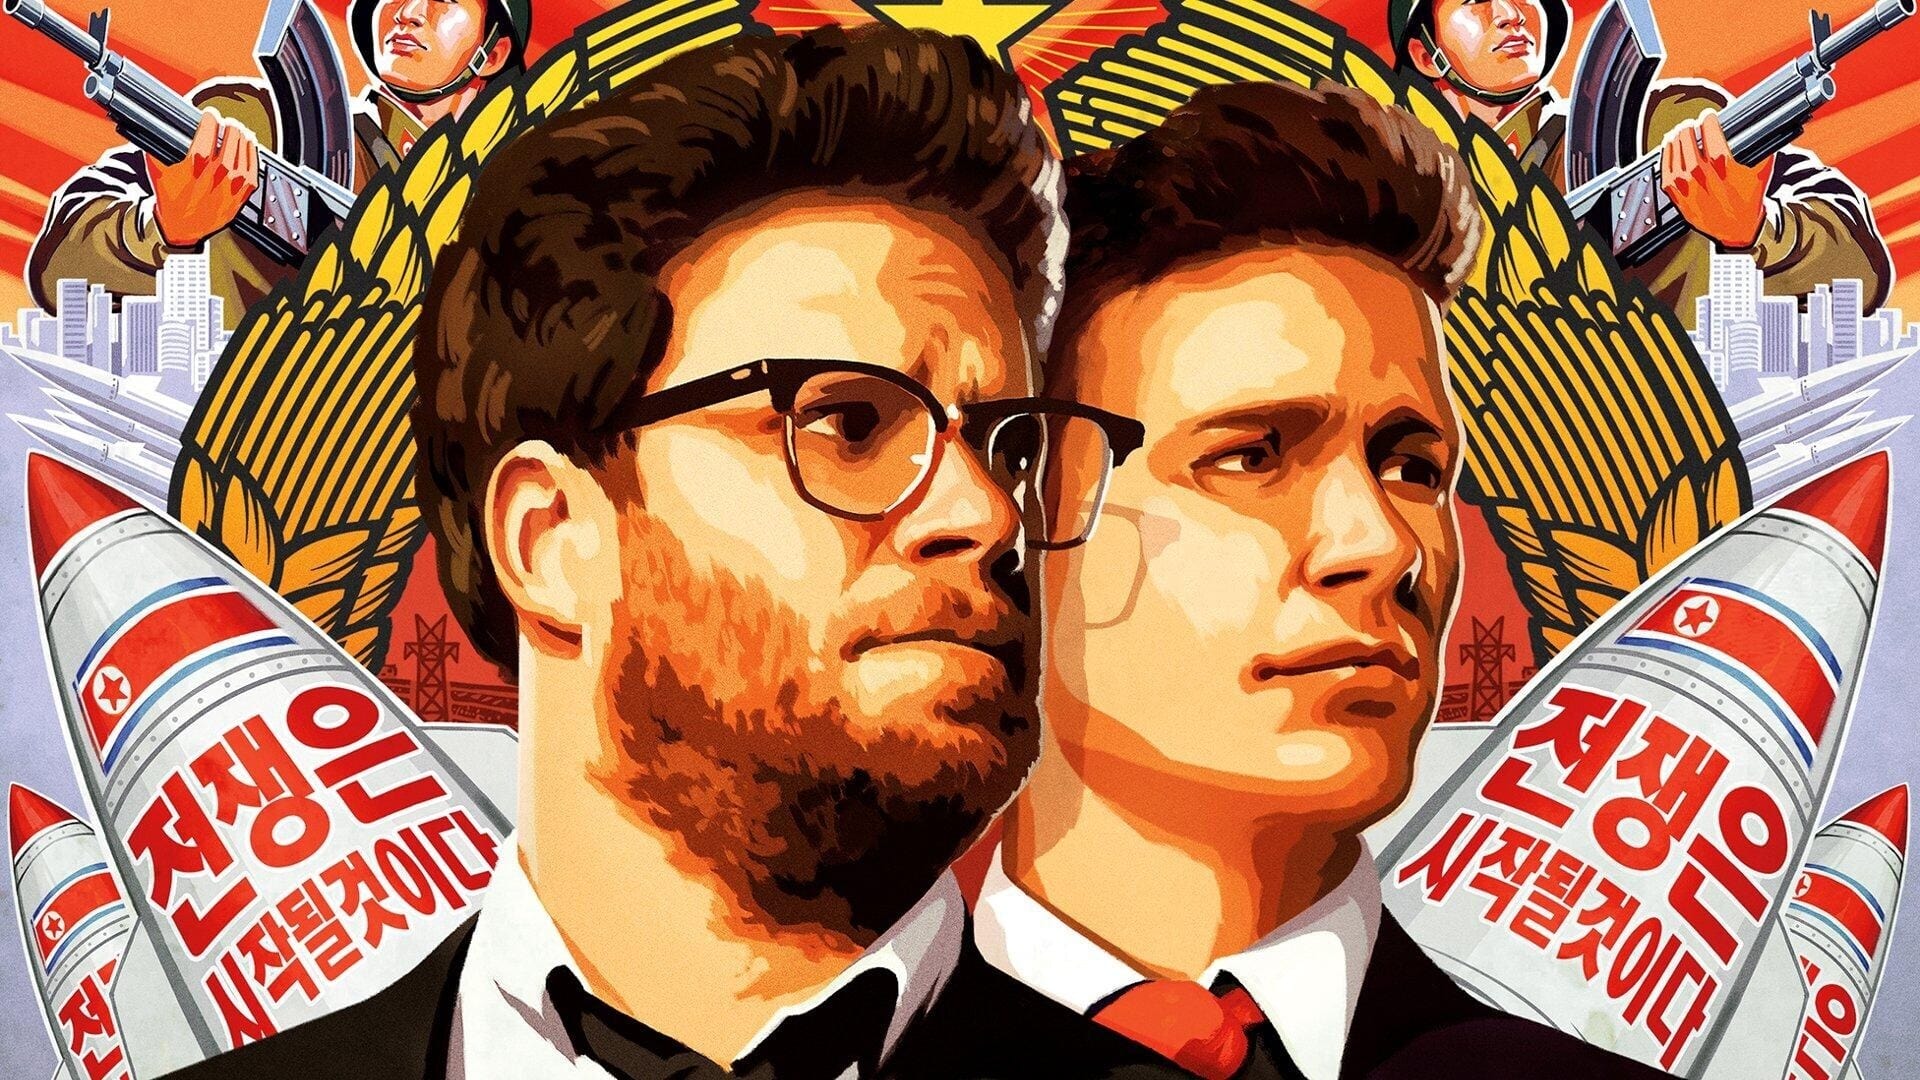 The Interview 2014 123movies